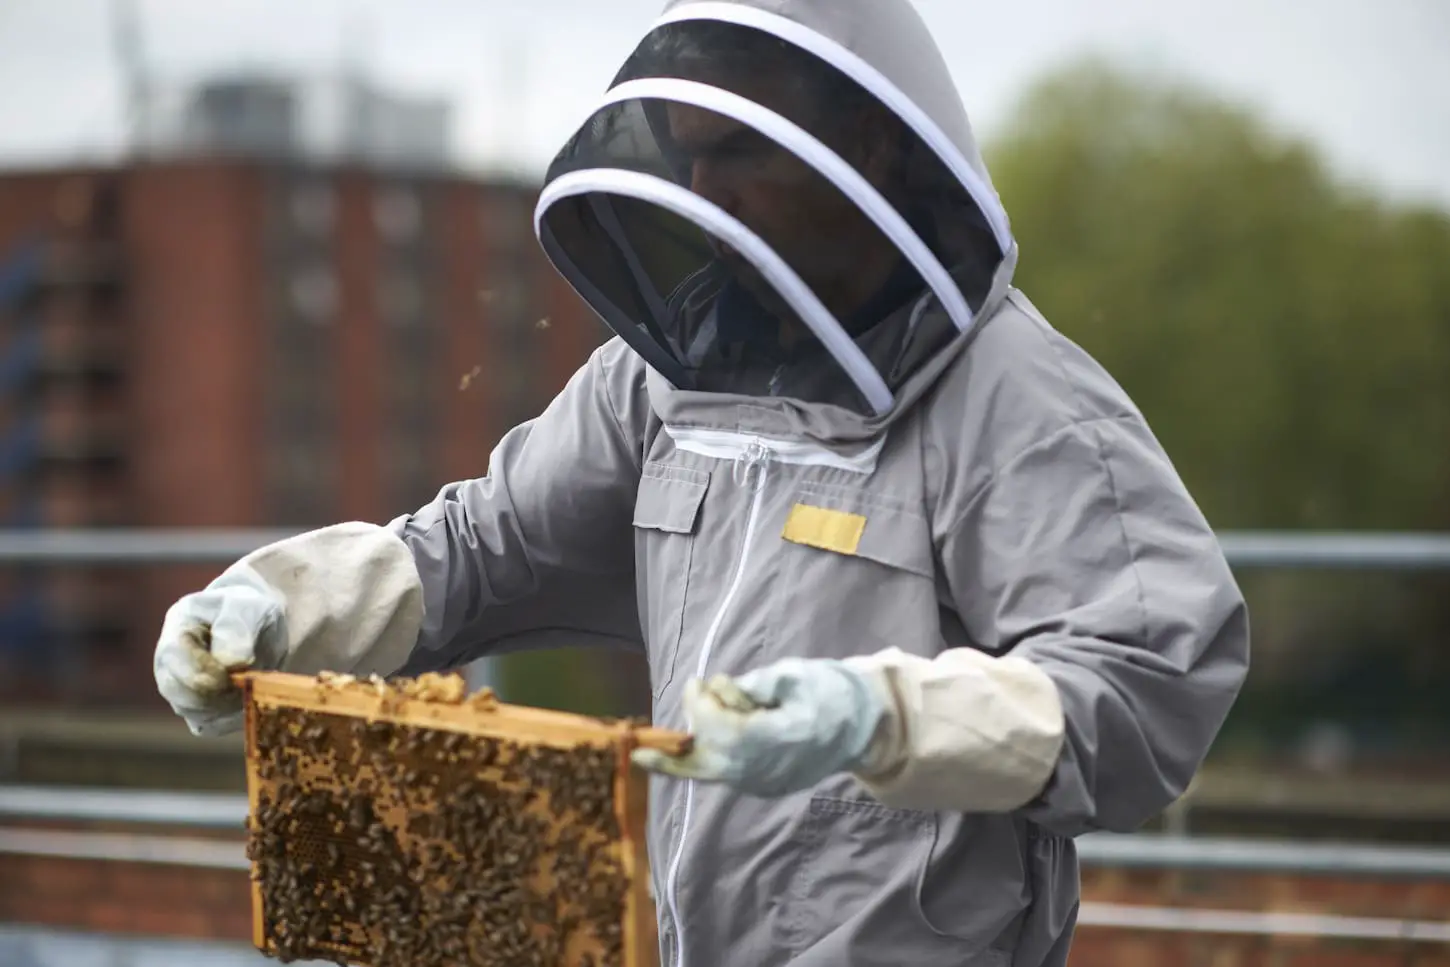 An image of a Beekeeper inspecting a hive frame.